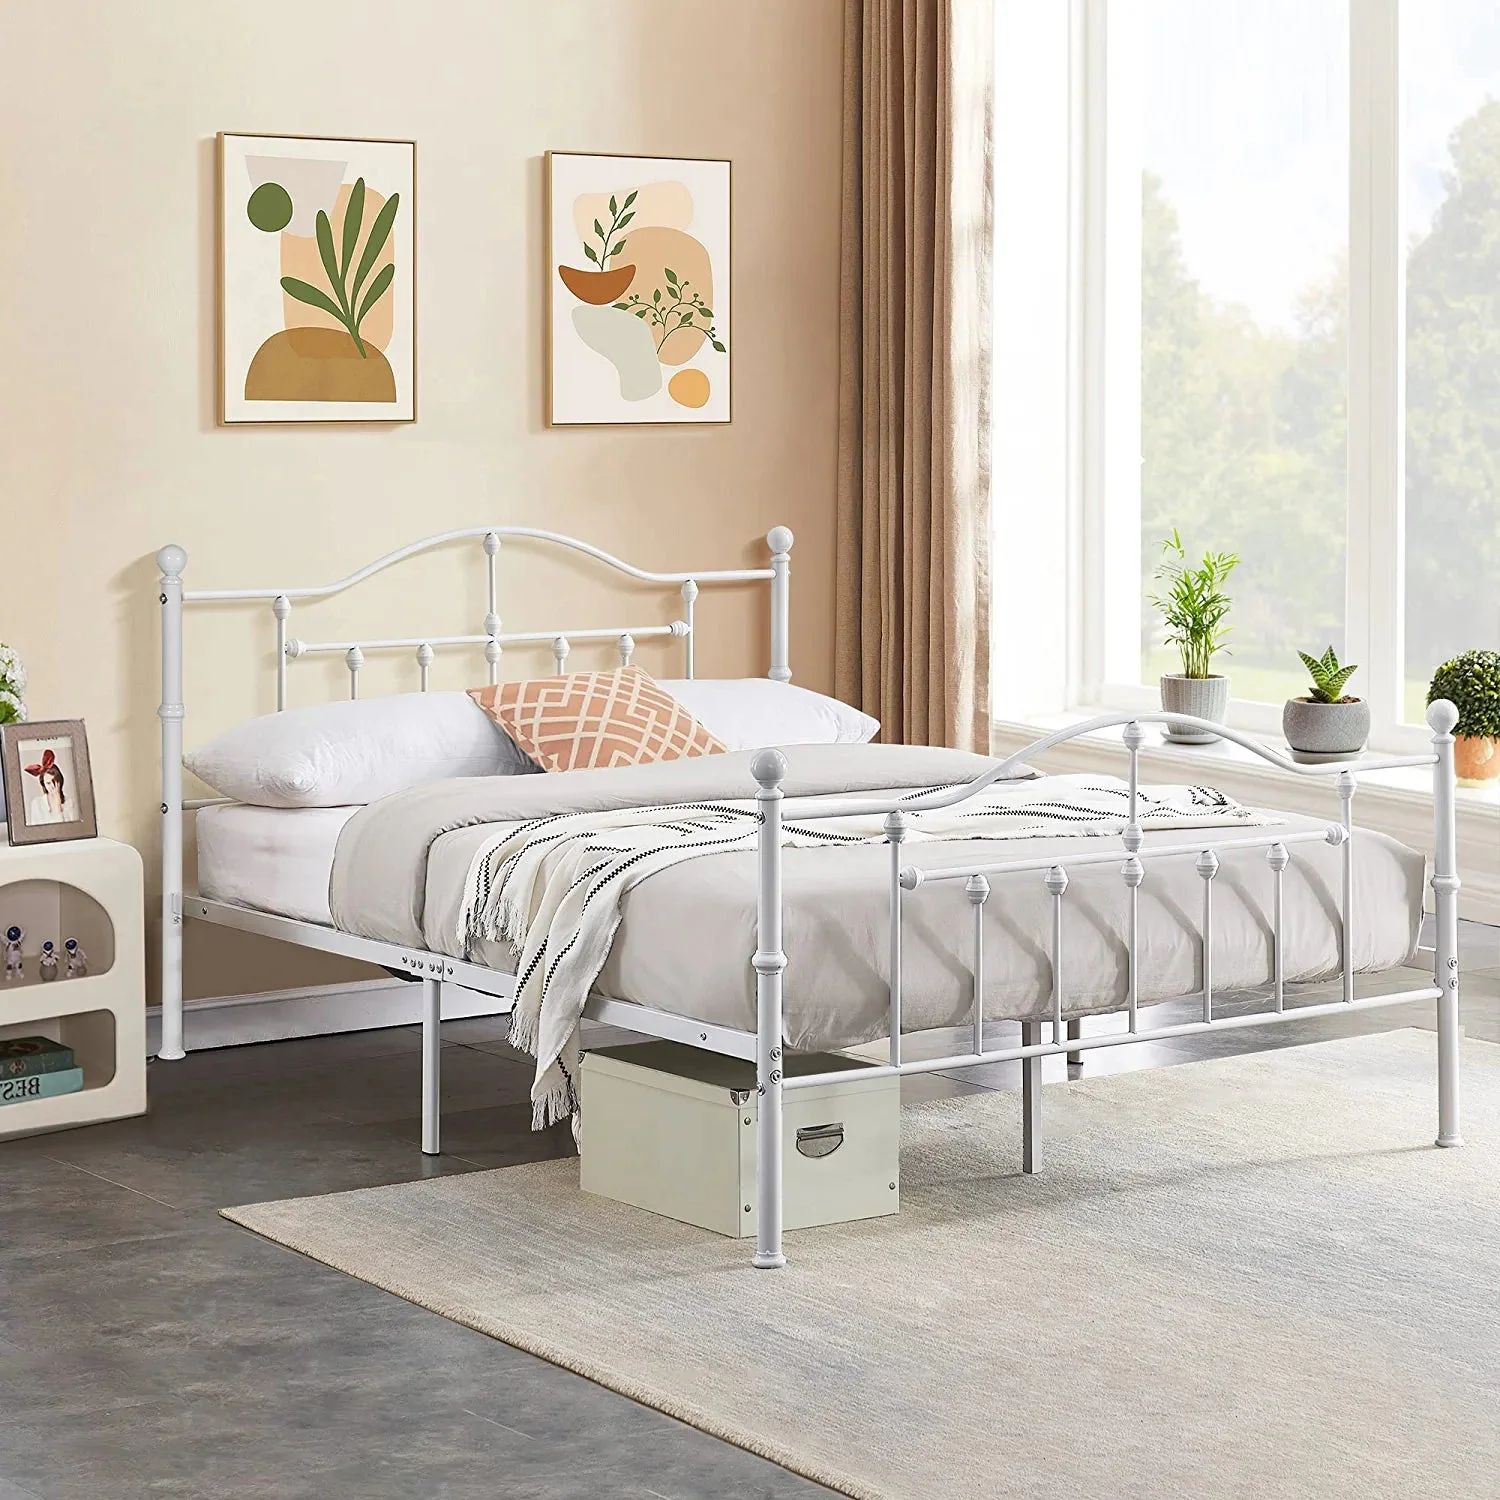 VECELO Victorian Metal Platform Bed Frame with Curved Headboard,Twin/Full/Queen Bed | Bed Bath & Beyond